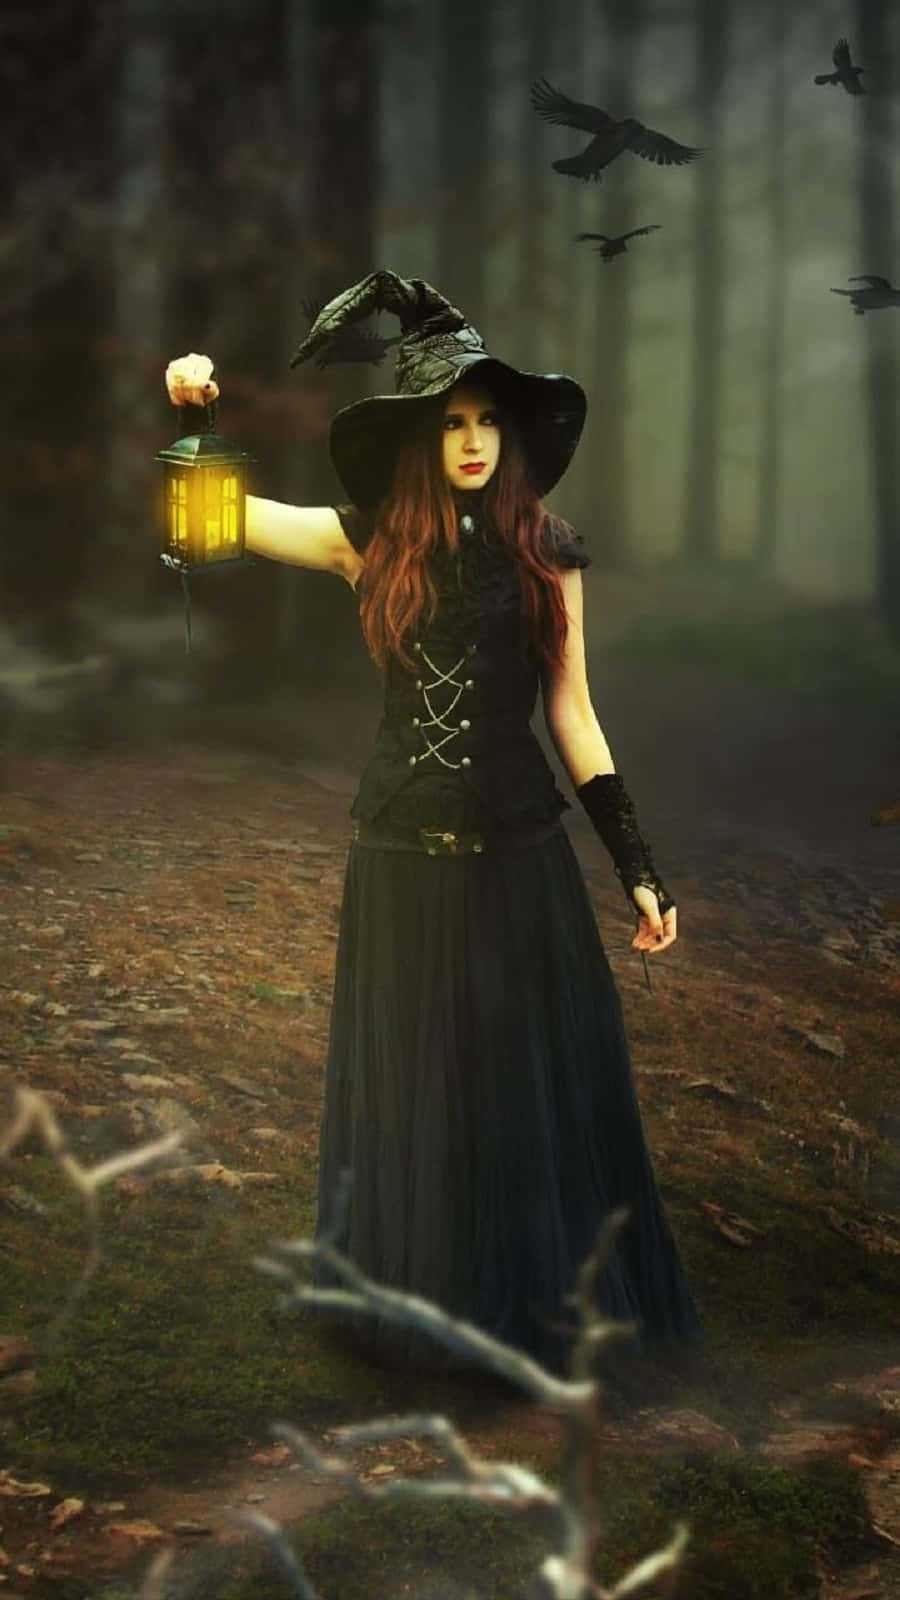 Enchanting Witch Costume in Full Display Wallpaper